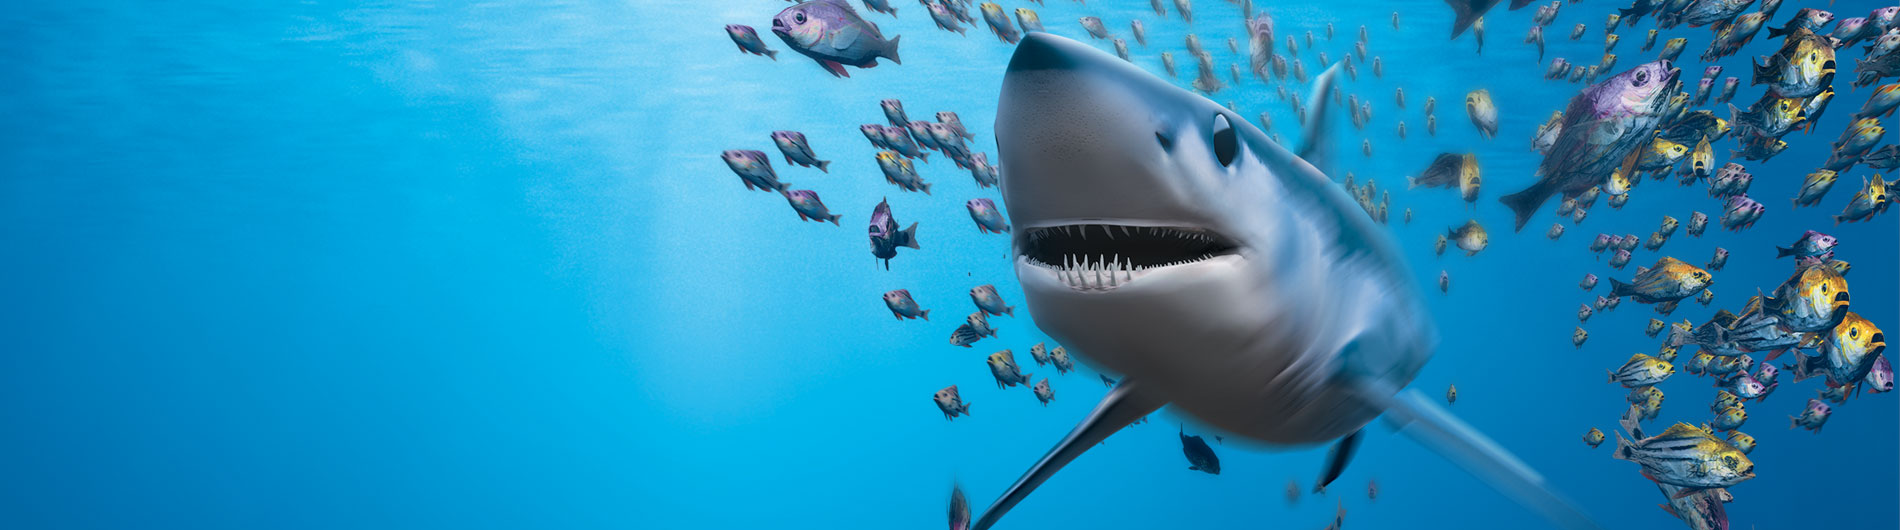 disruptor shark in middle of school of fish